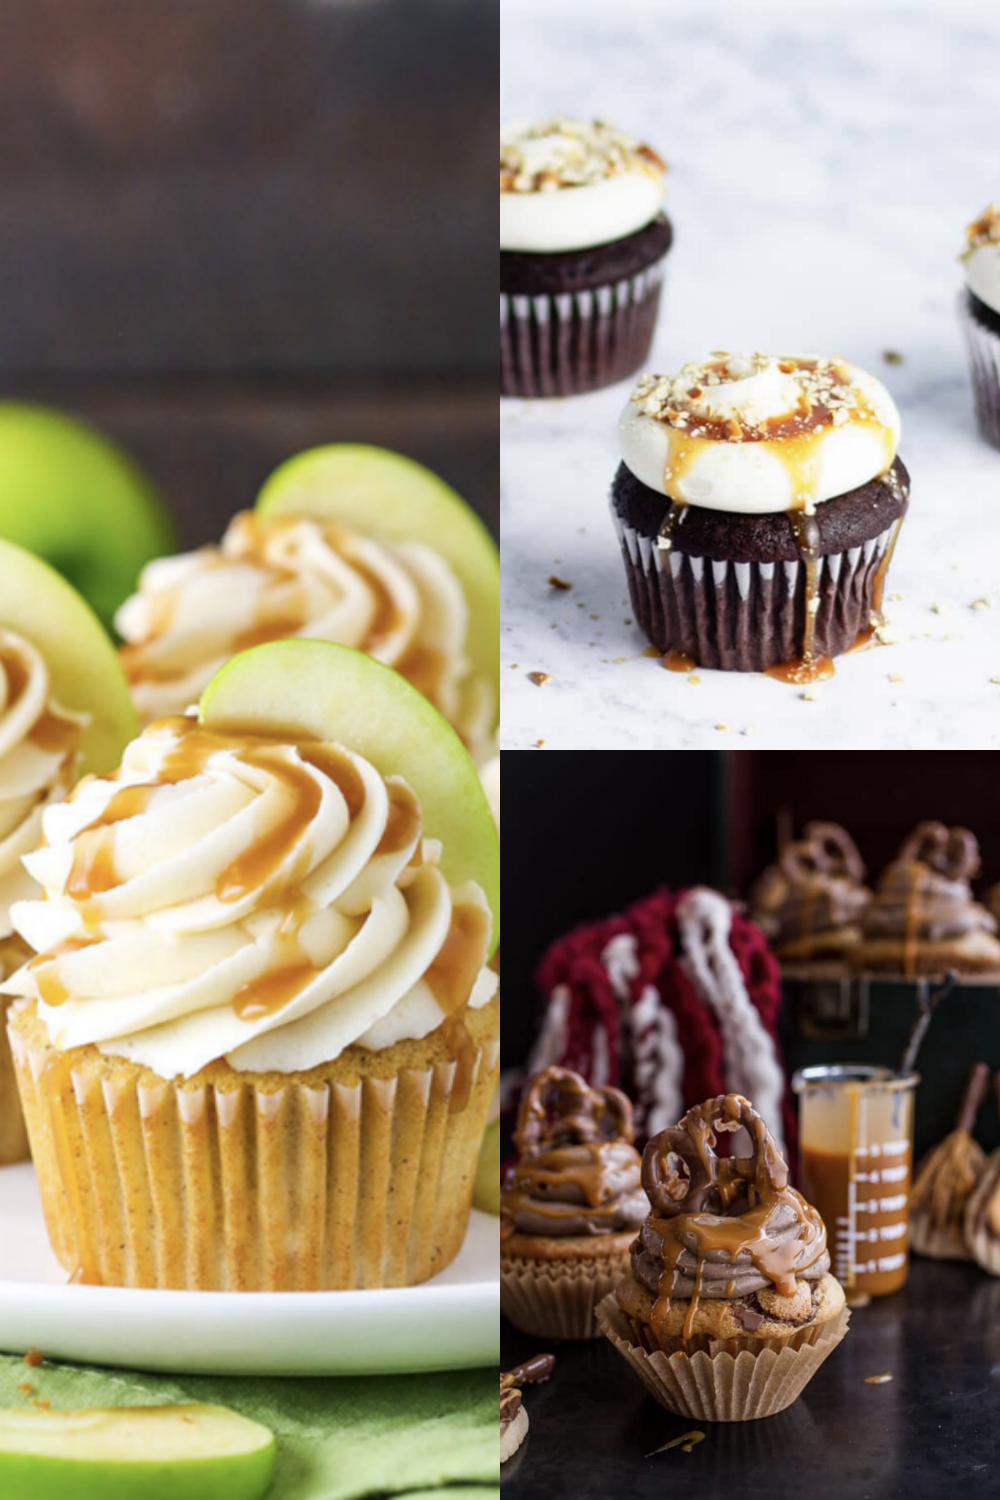 These Best Fall Cupcakes are fancy enough for a formal autumn wedding, yet easy enough for a casual birthday party or dessert any night of the week, making them truly perfect for any occasion!